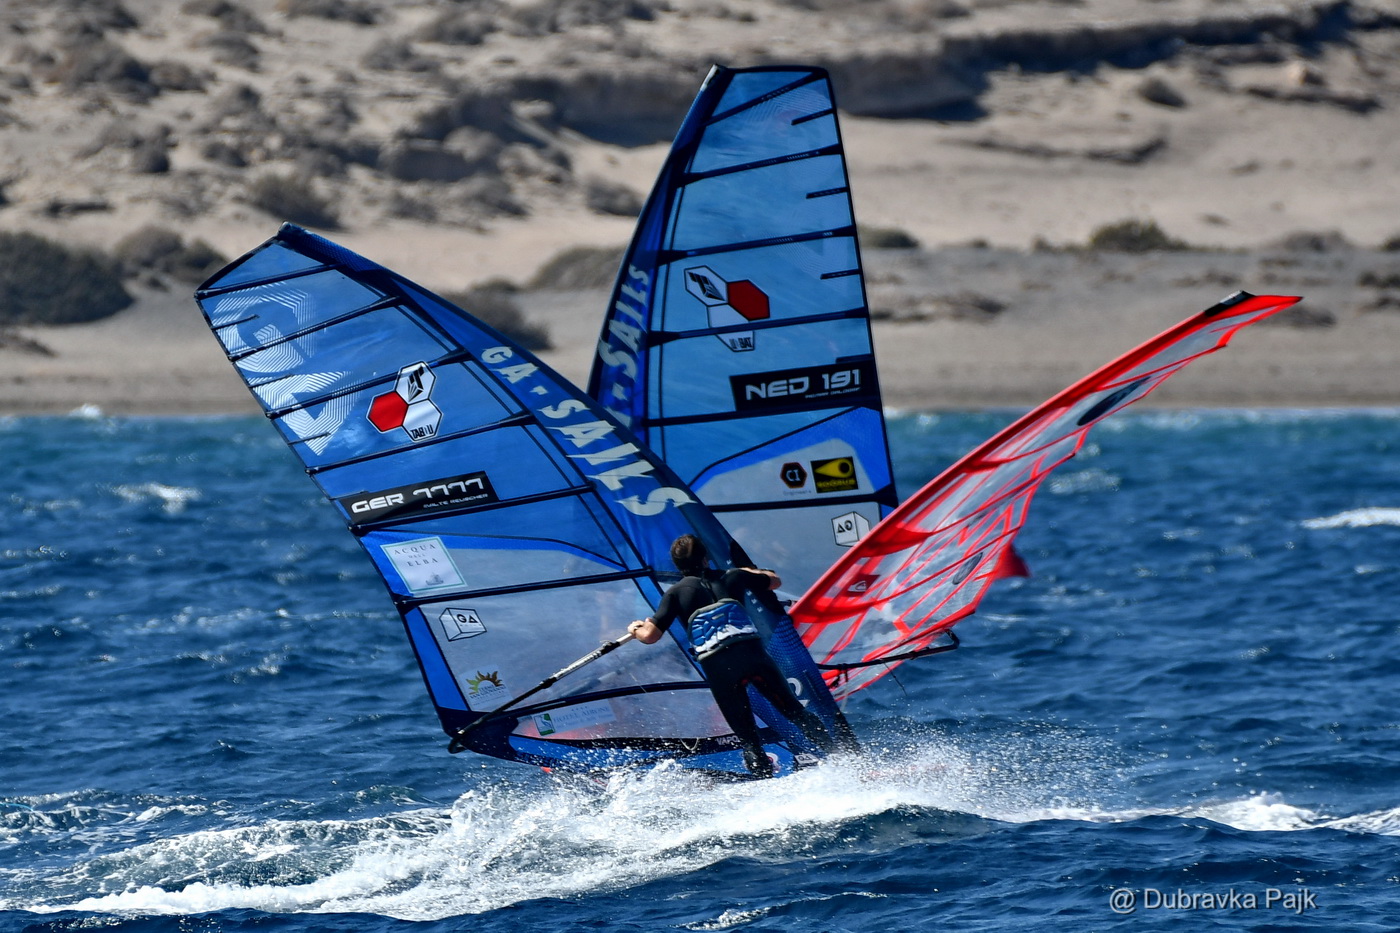 Windsurfing is a release from all worldly contrived pressures